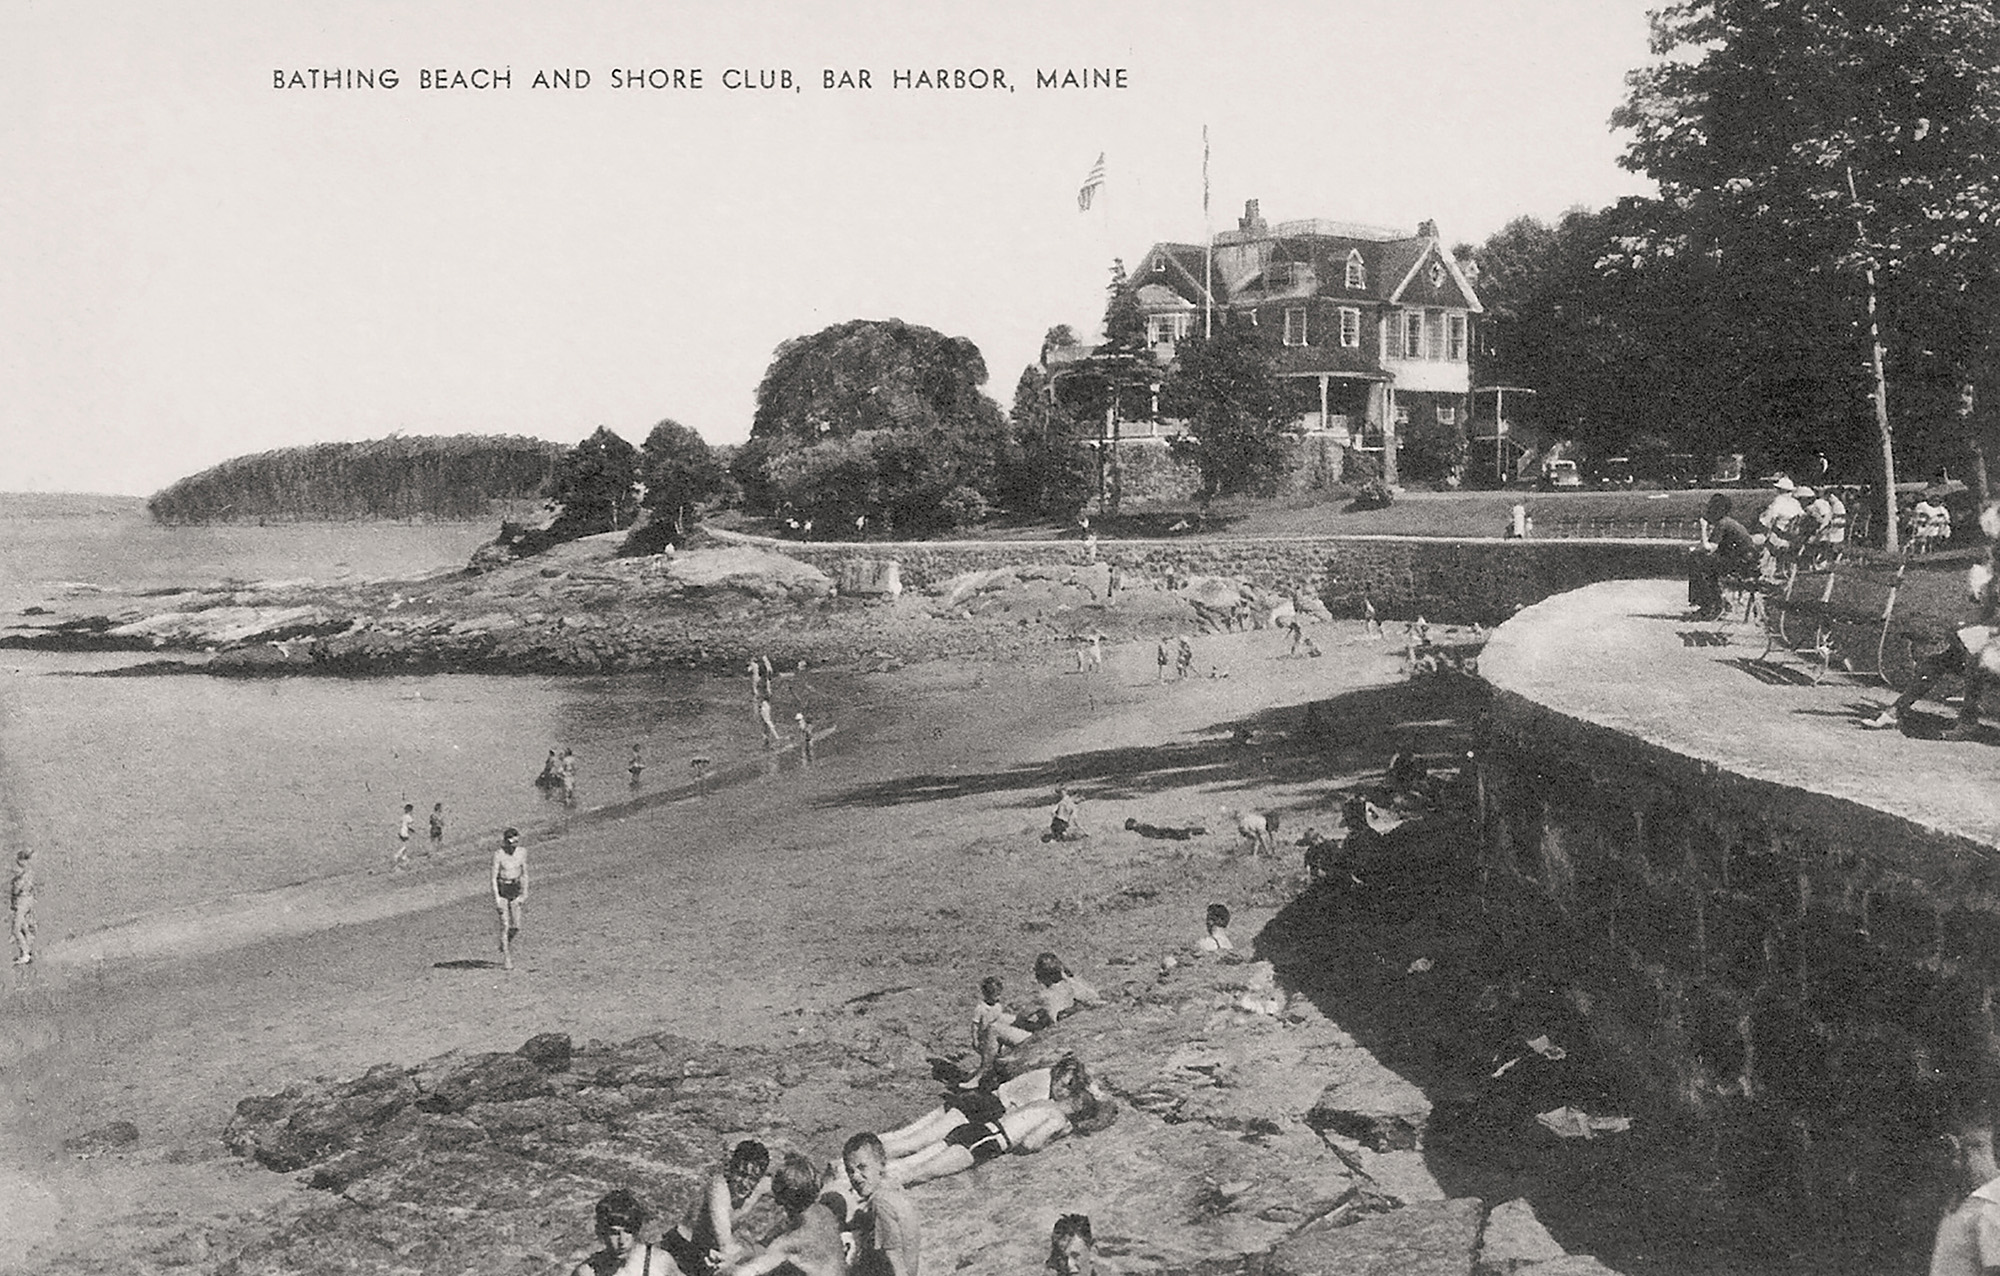 historic image of Bathing Beach and Shore Club. Courtesy of Jesup Memorial Library.